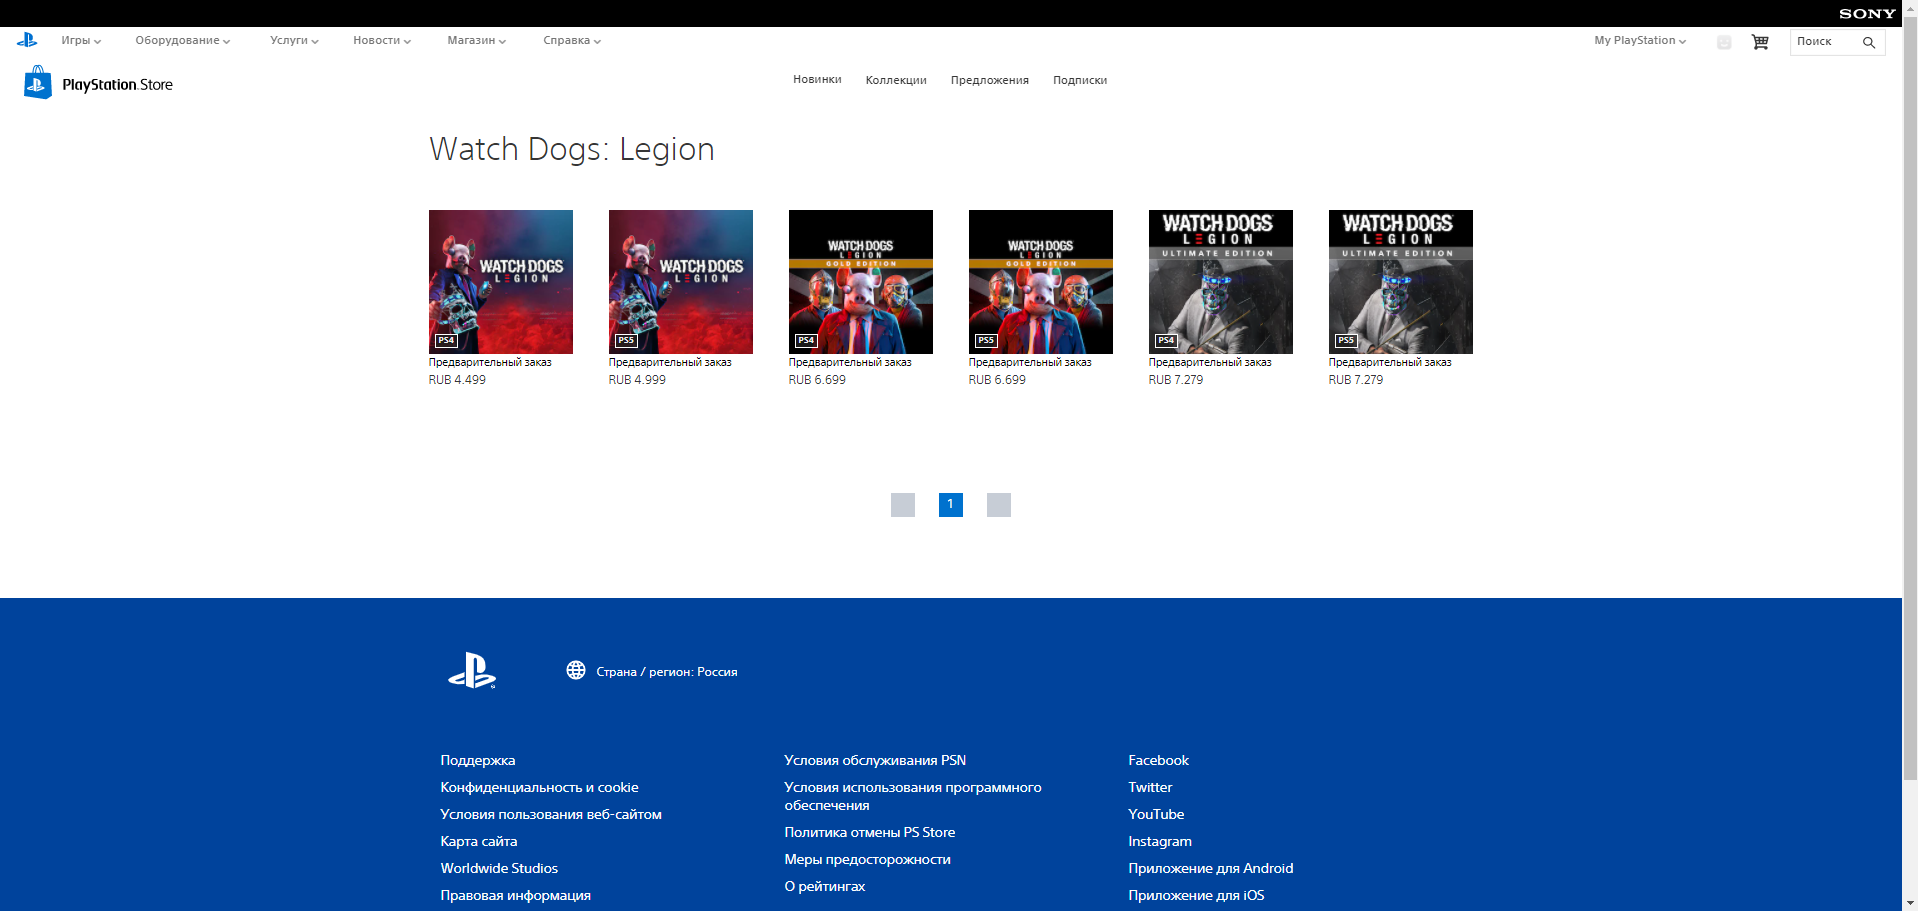 Playstation store